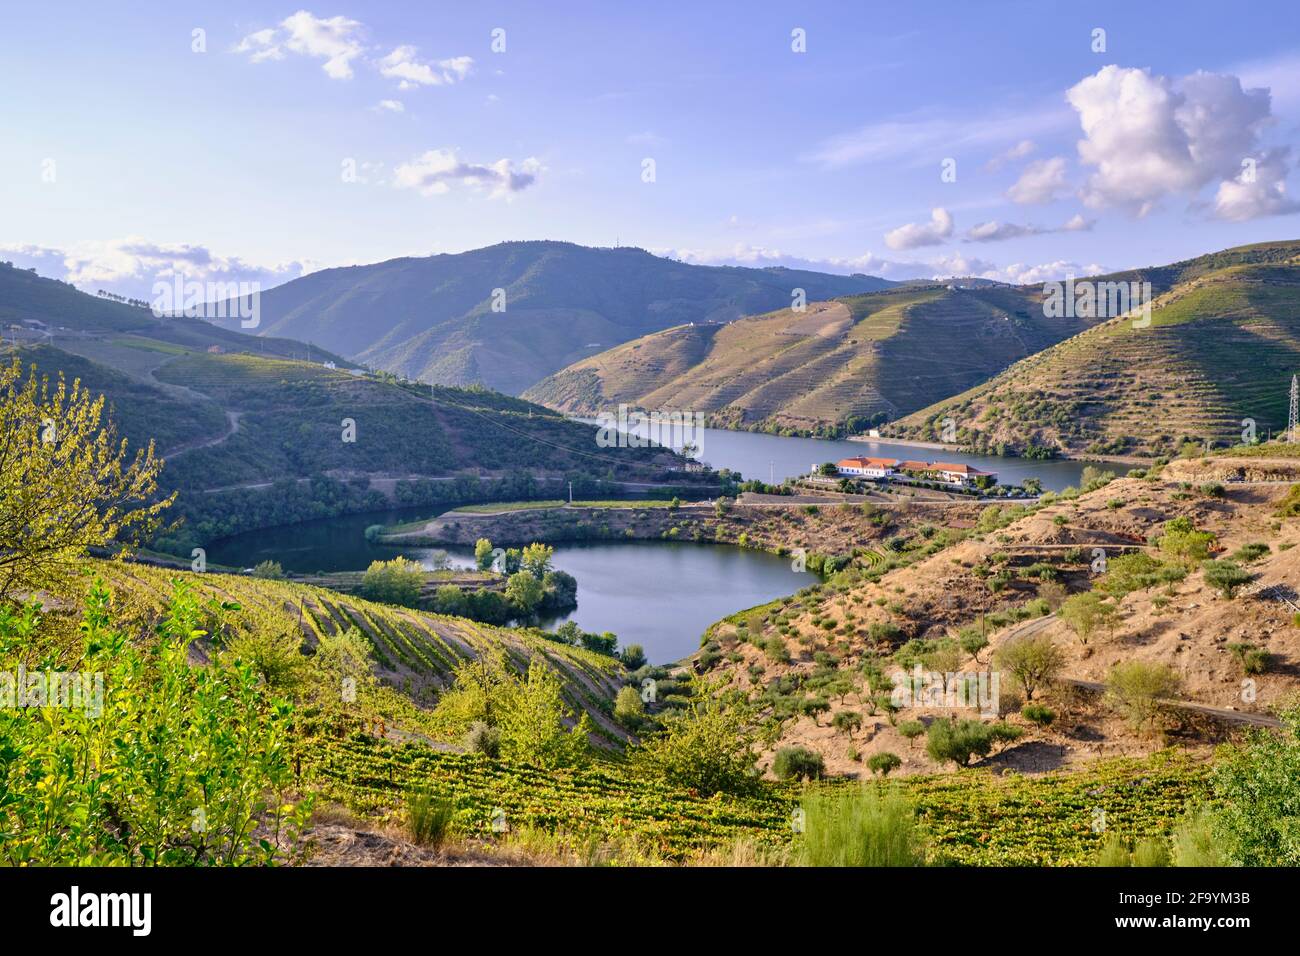 River Douro and Quinta do Tedo with the terraced vineyards along the river Tedo, a tributary of the Douro river. Alto Douro, A UNESCO World Heritage S Stock Photo